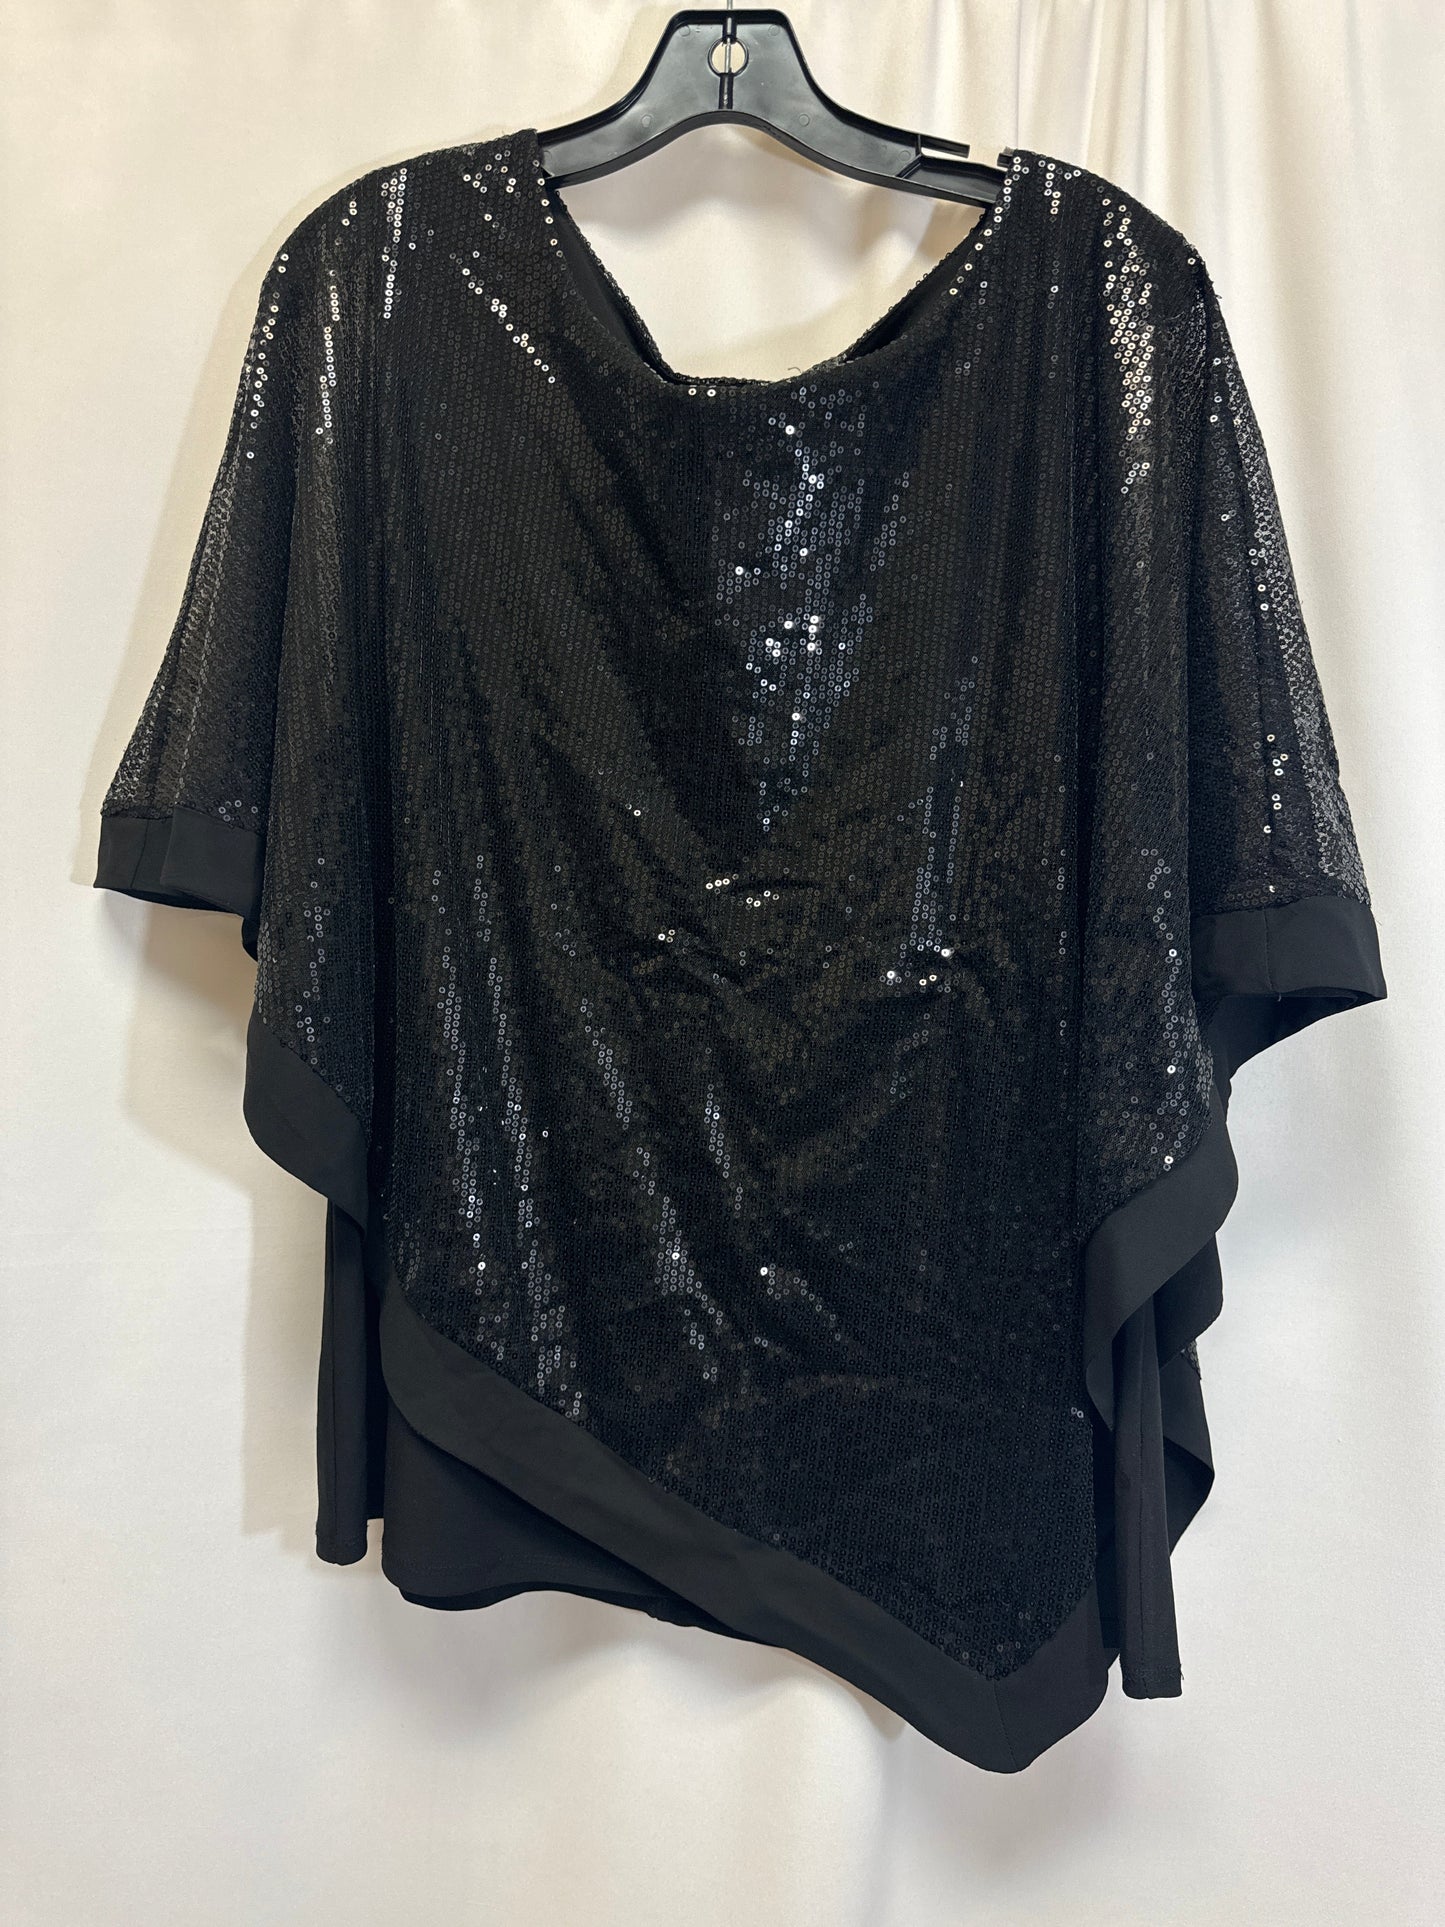 Black Top Short Sleeve Cato, Size Xl